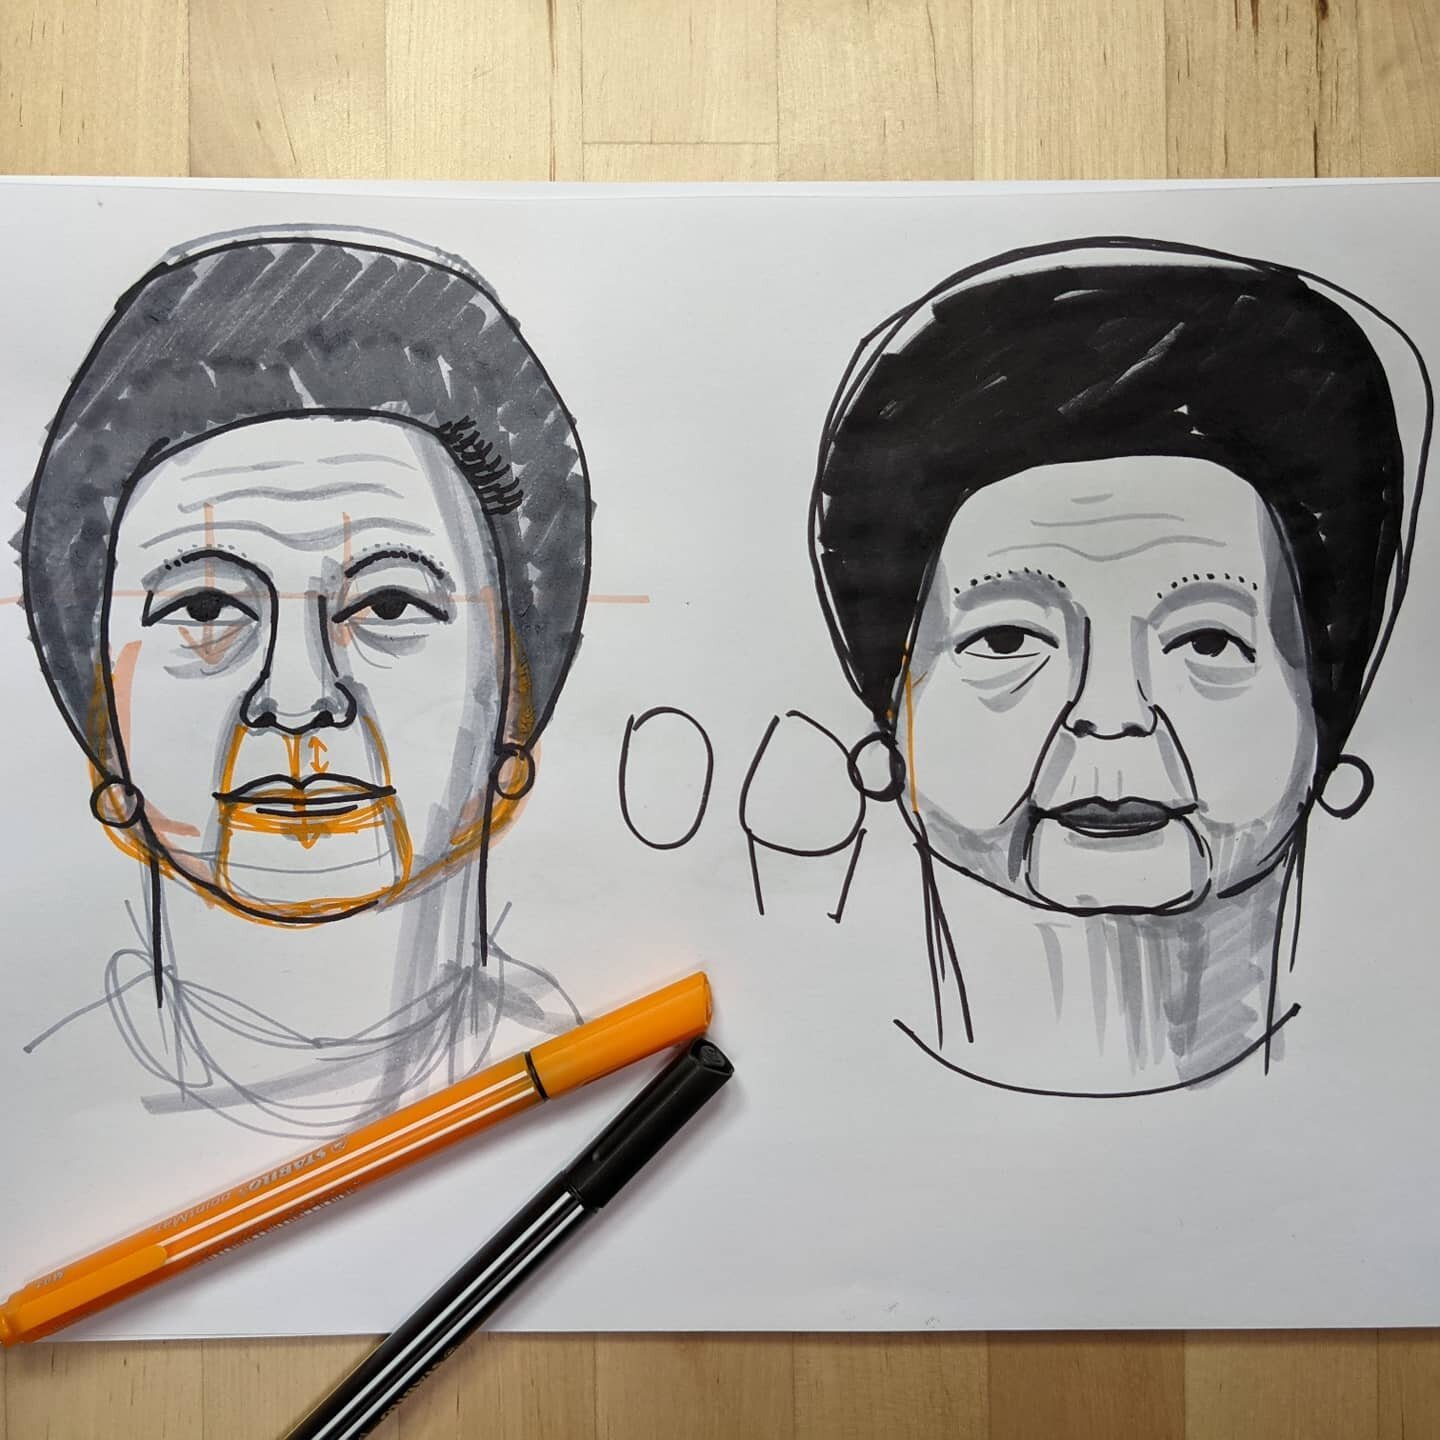 Yesterday, we practiced drawing portraits. This sheet shows my two attempts of the same person. The first one looks nothing like the model, the second one is getting much closer to the actual vibe of the older lady's face. 

My first sketch of anythi